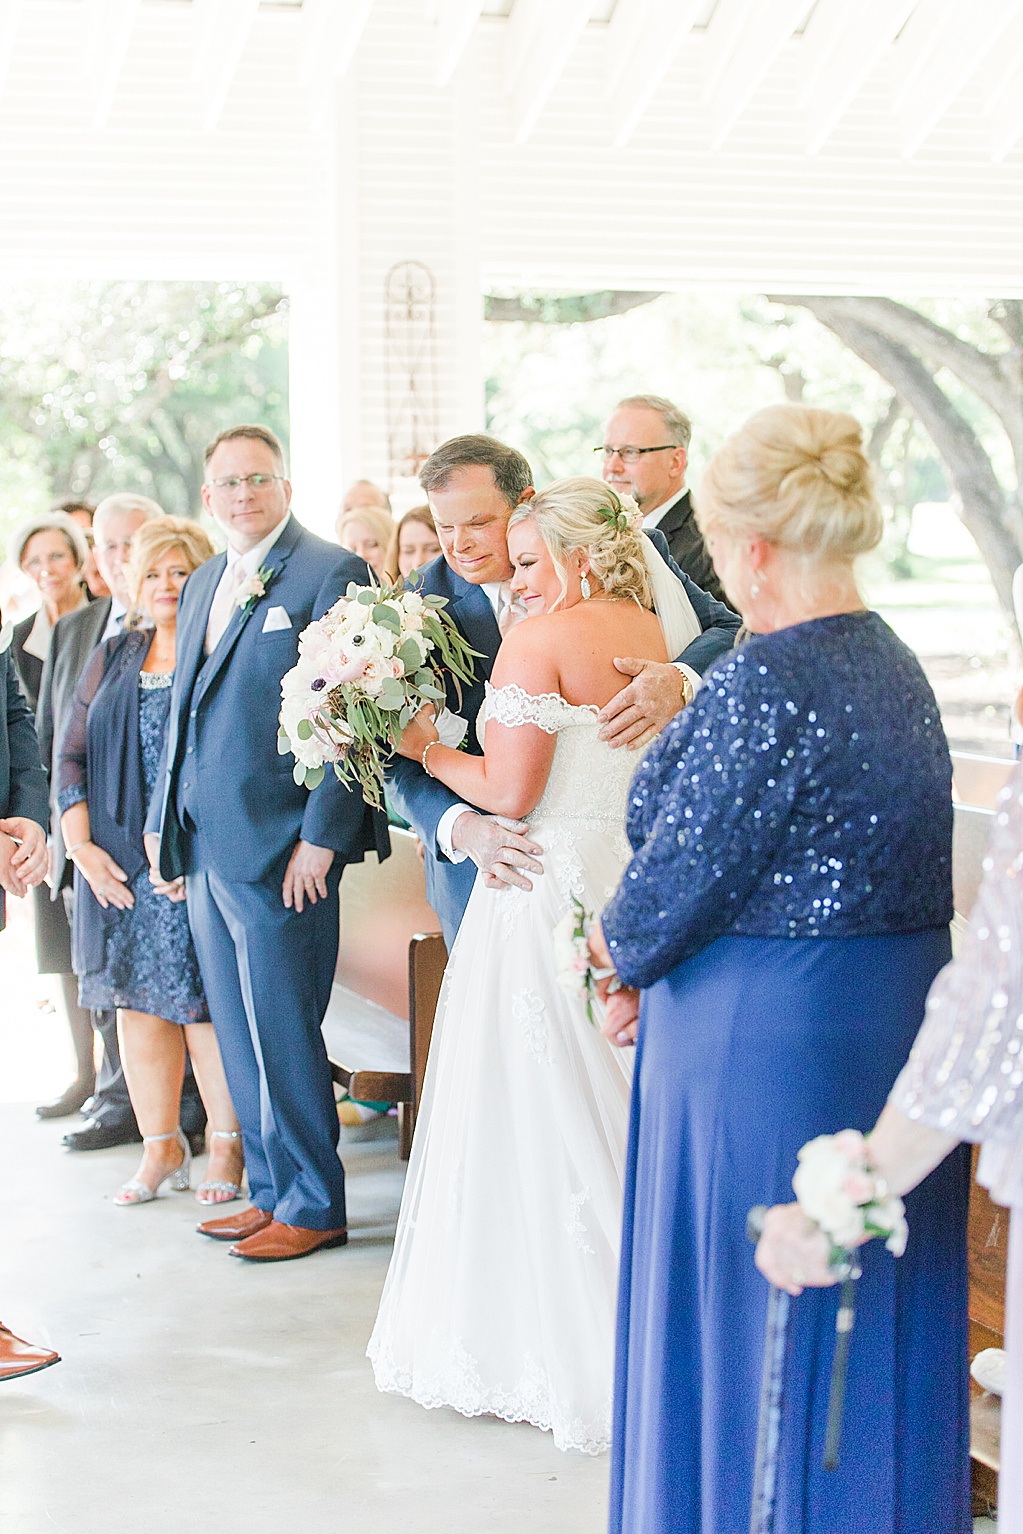 A spring blush and navy wedding at The Chandelier of Gruene Wedding Venue in New Braunfels Texas 0064